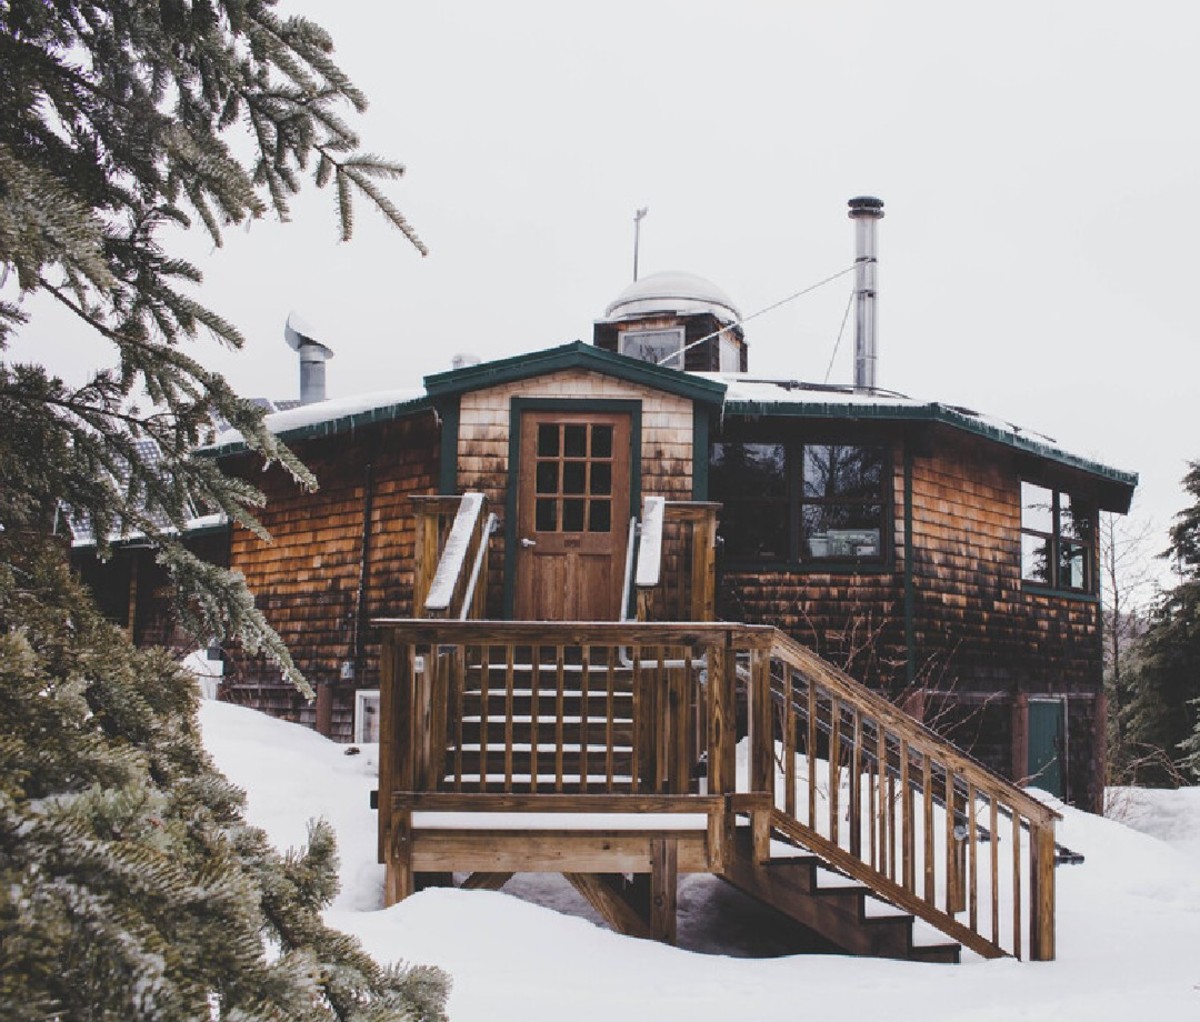 Snowy image of Lonesome Lake Hut in the Appalachian Mountain Club hut system